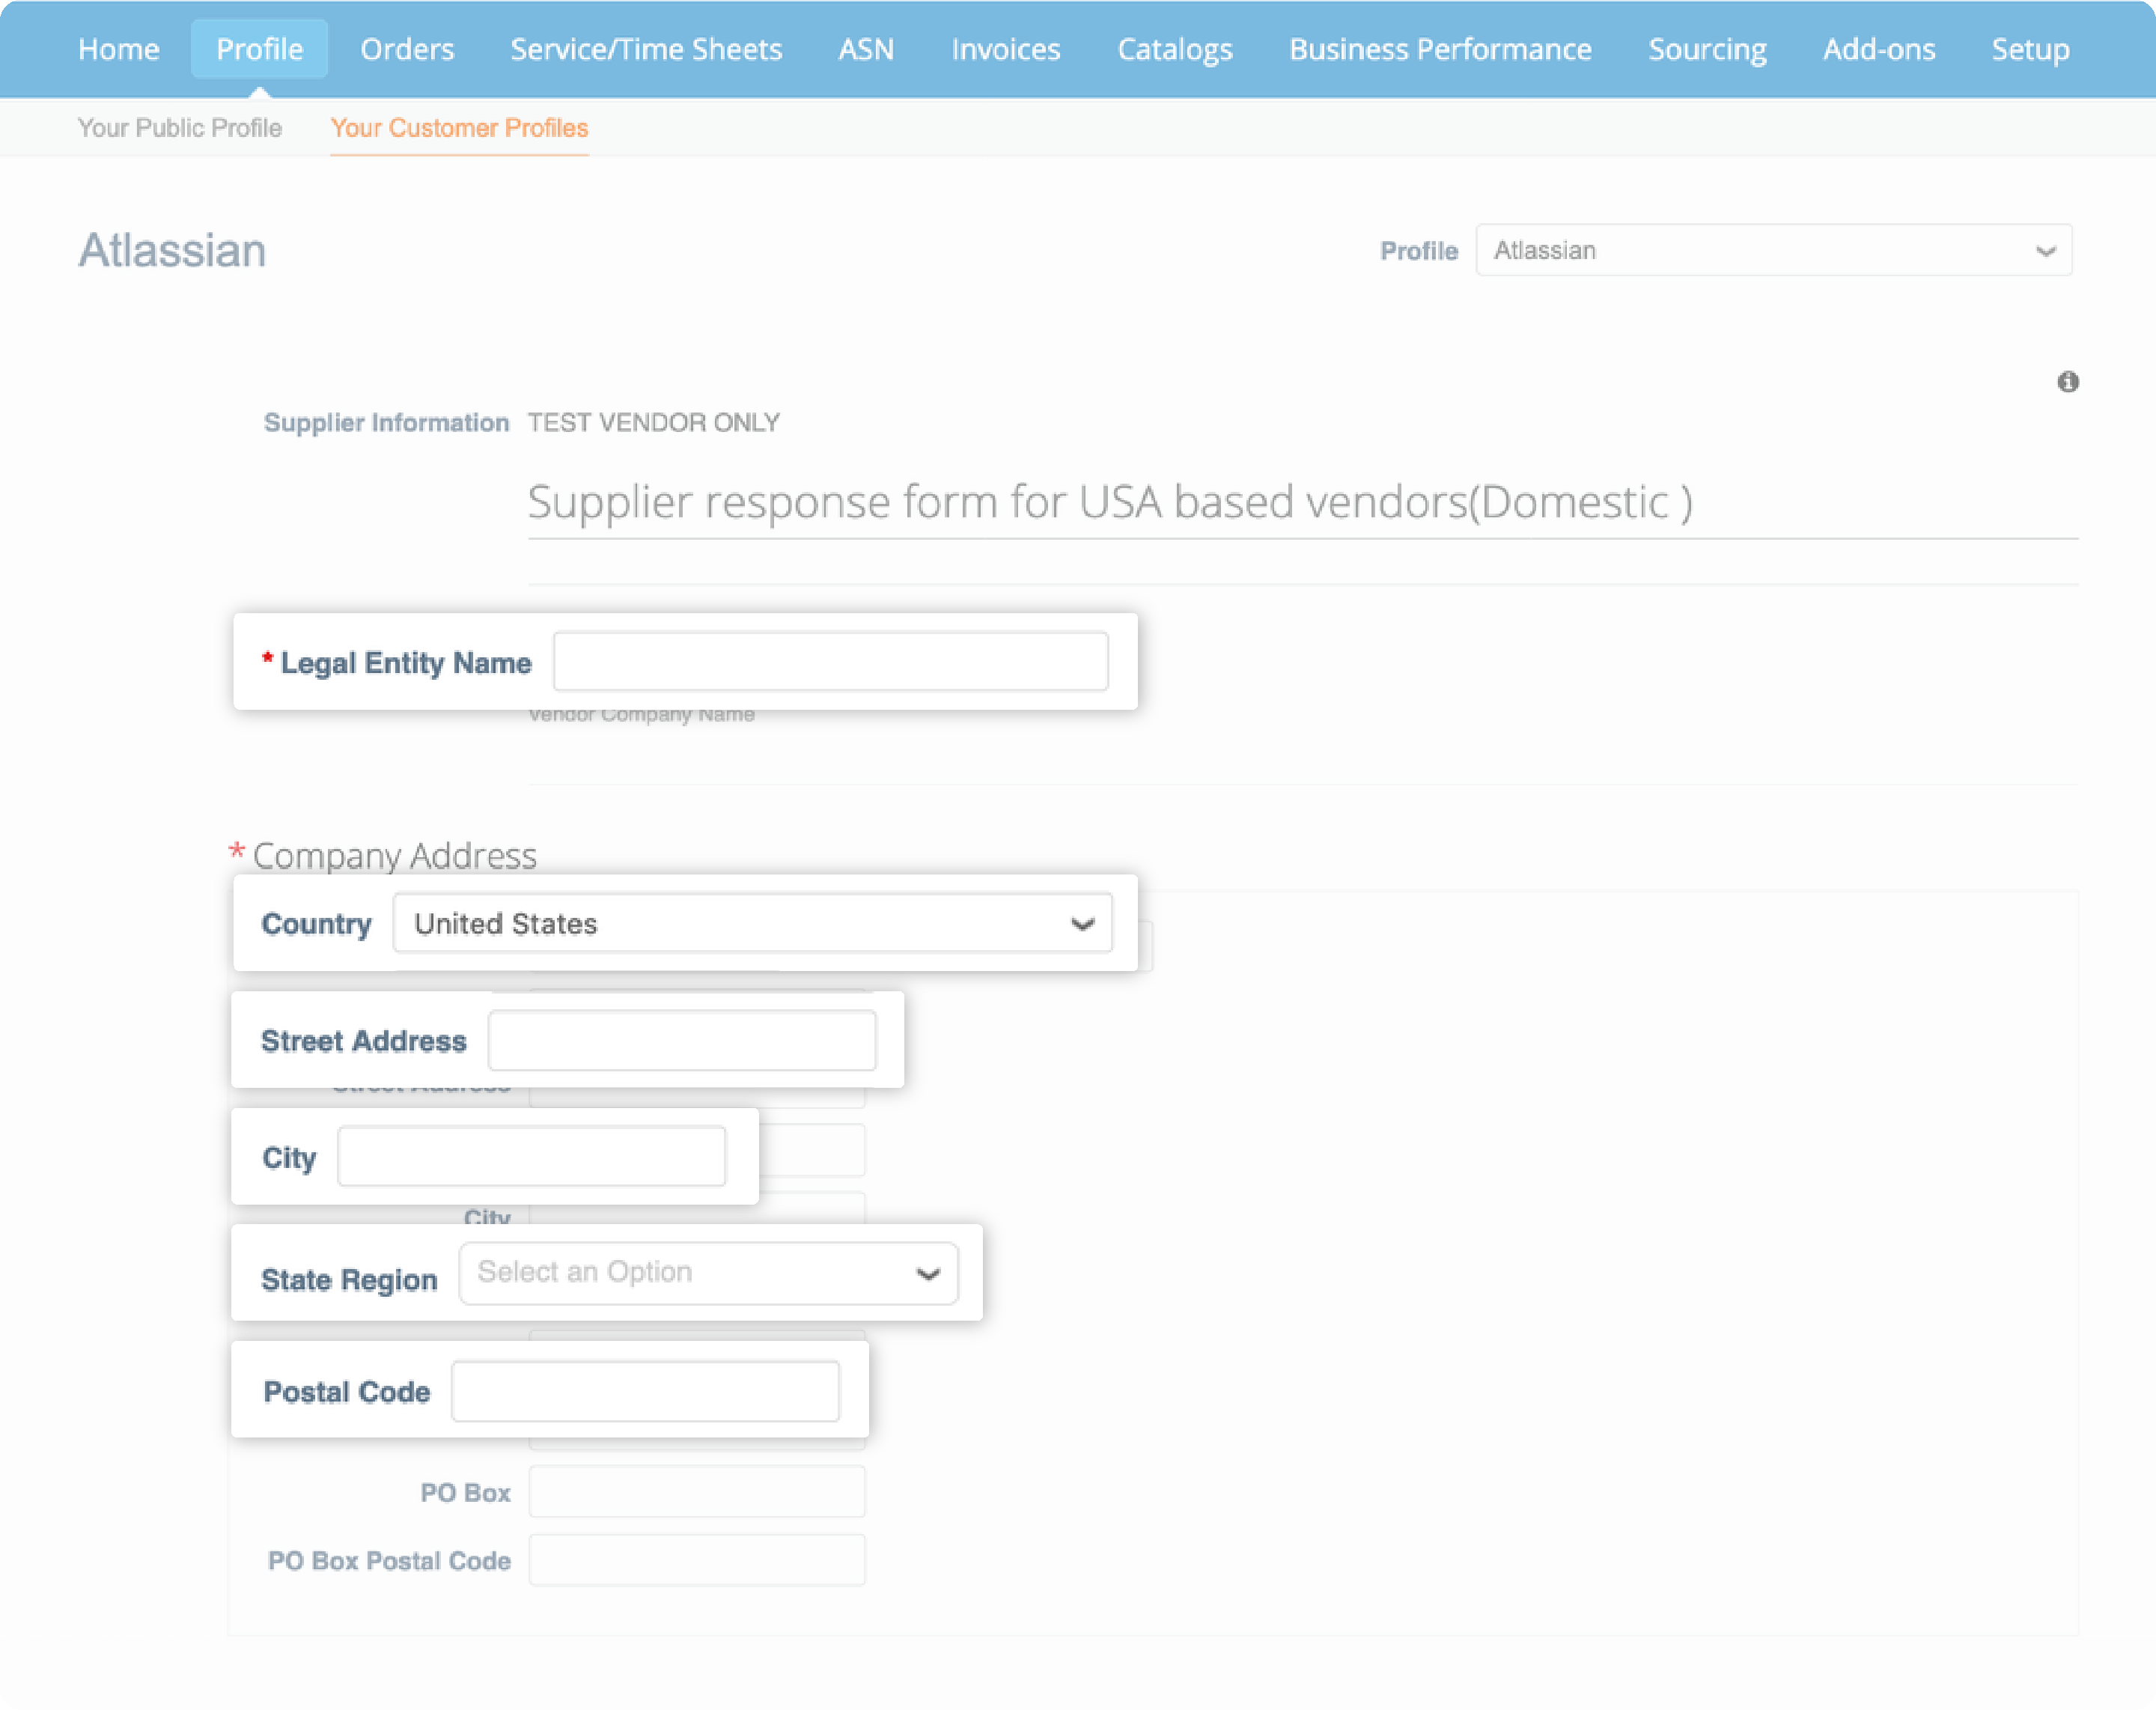 Update your company address once supplier form is displayed in Coupa Supplier Portal